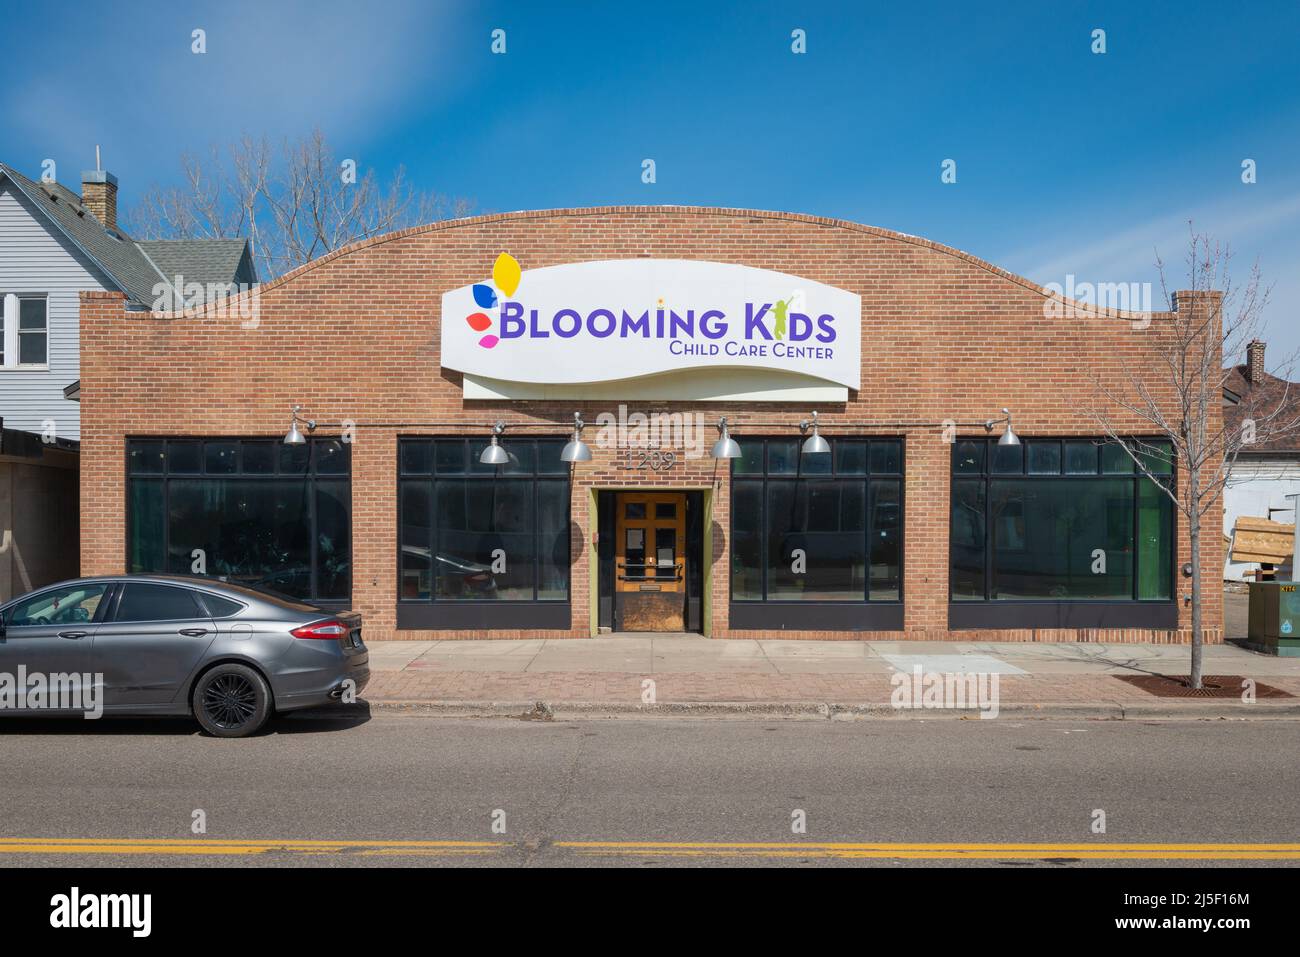 SAINT CLOUD, MINNESOTA - February 19, 2022: Blooming Kids Child Care Center, located at 1209 W St Germain Street, is photographed. Stock Photo